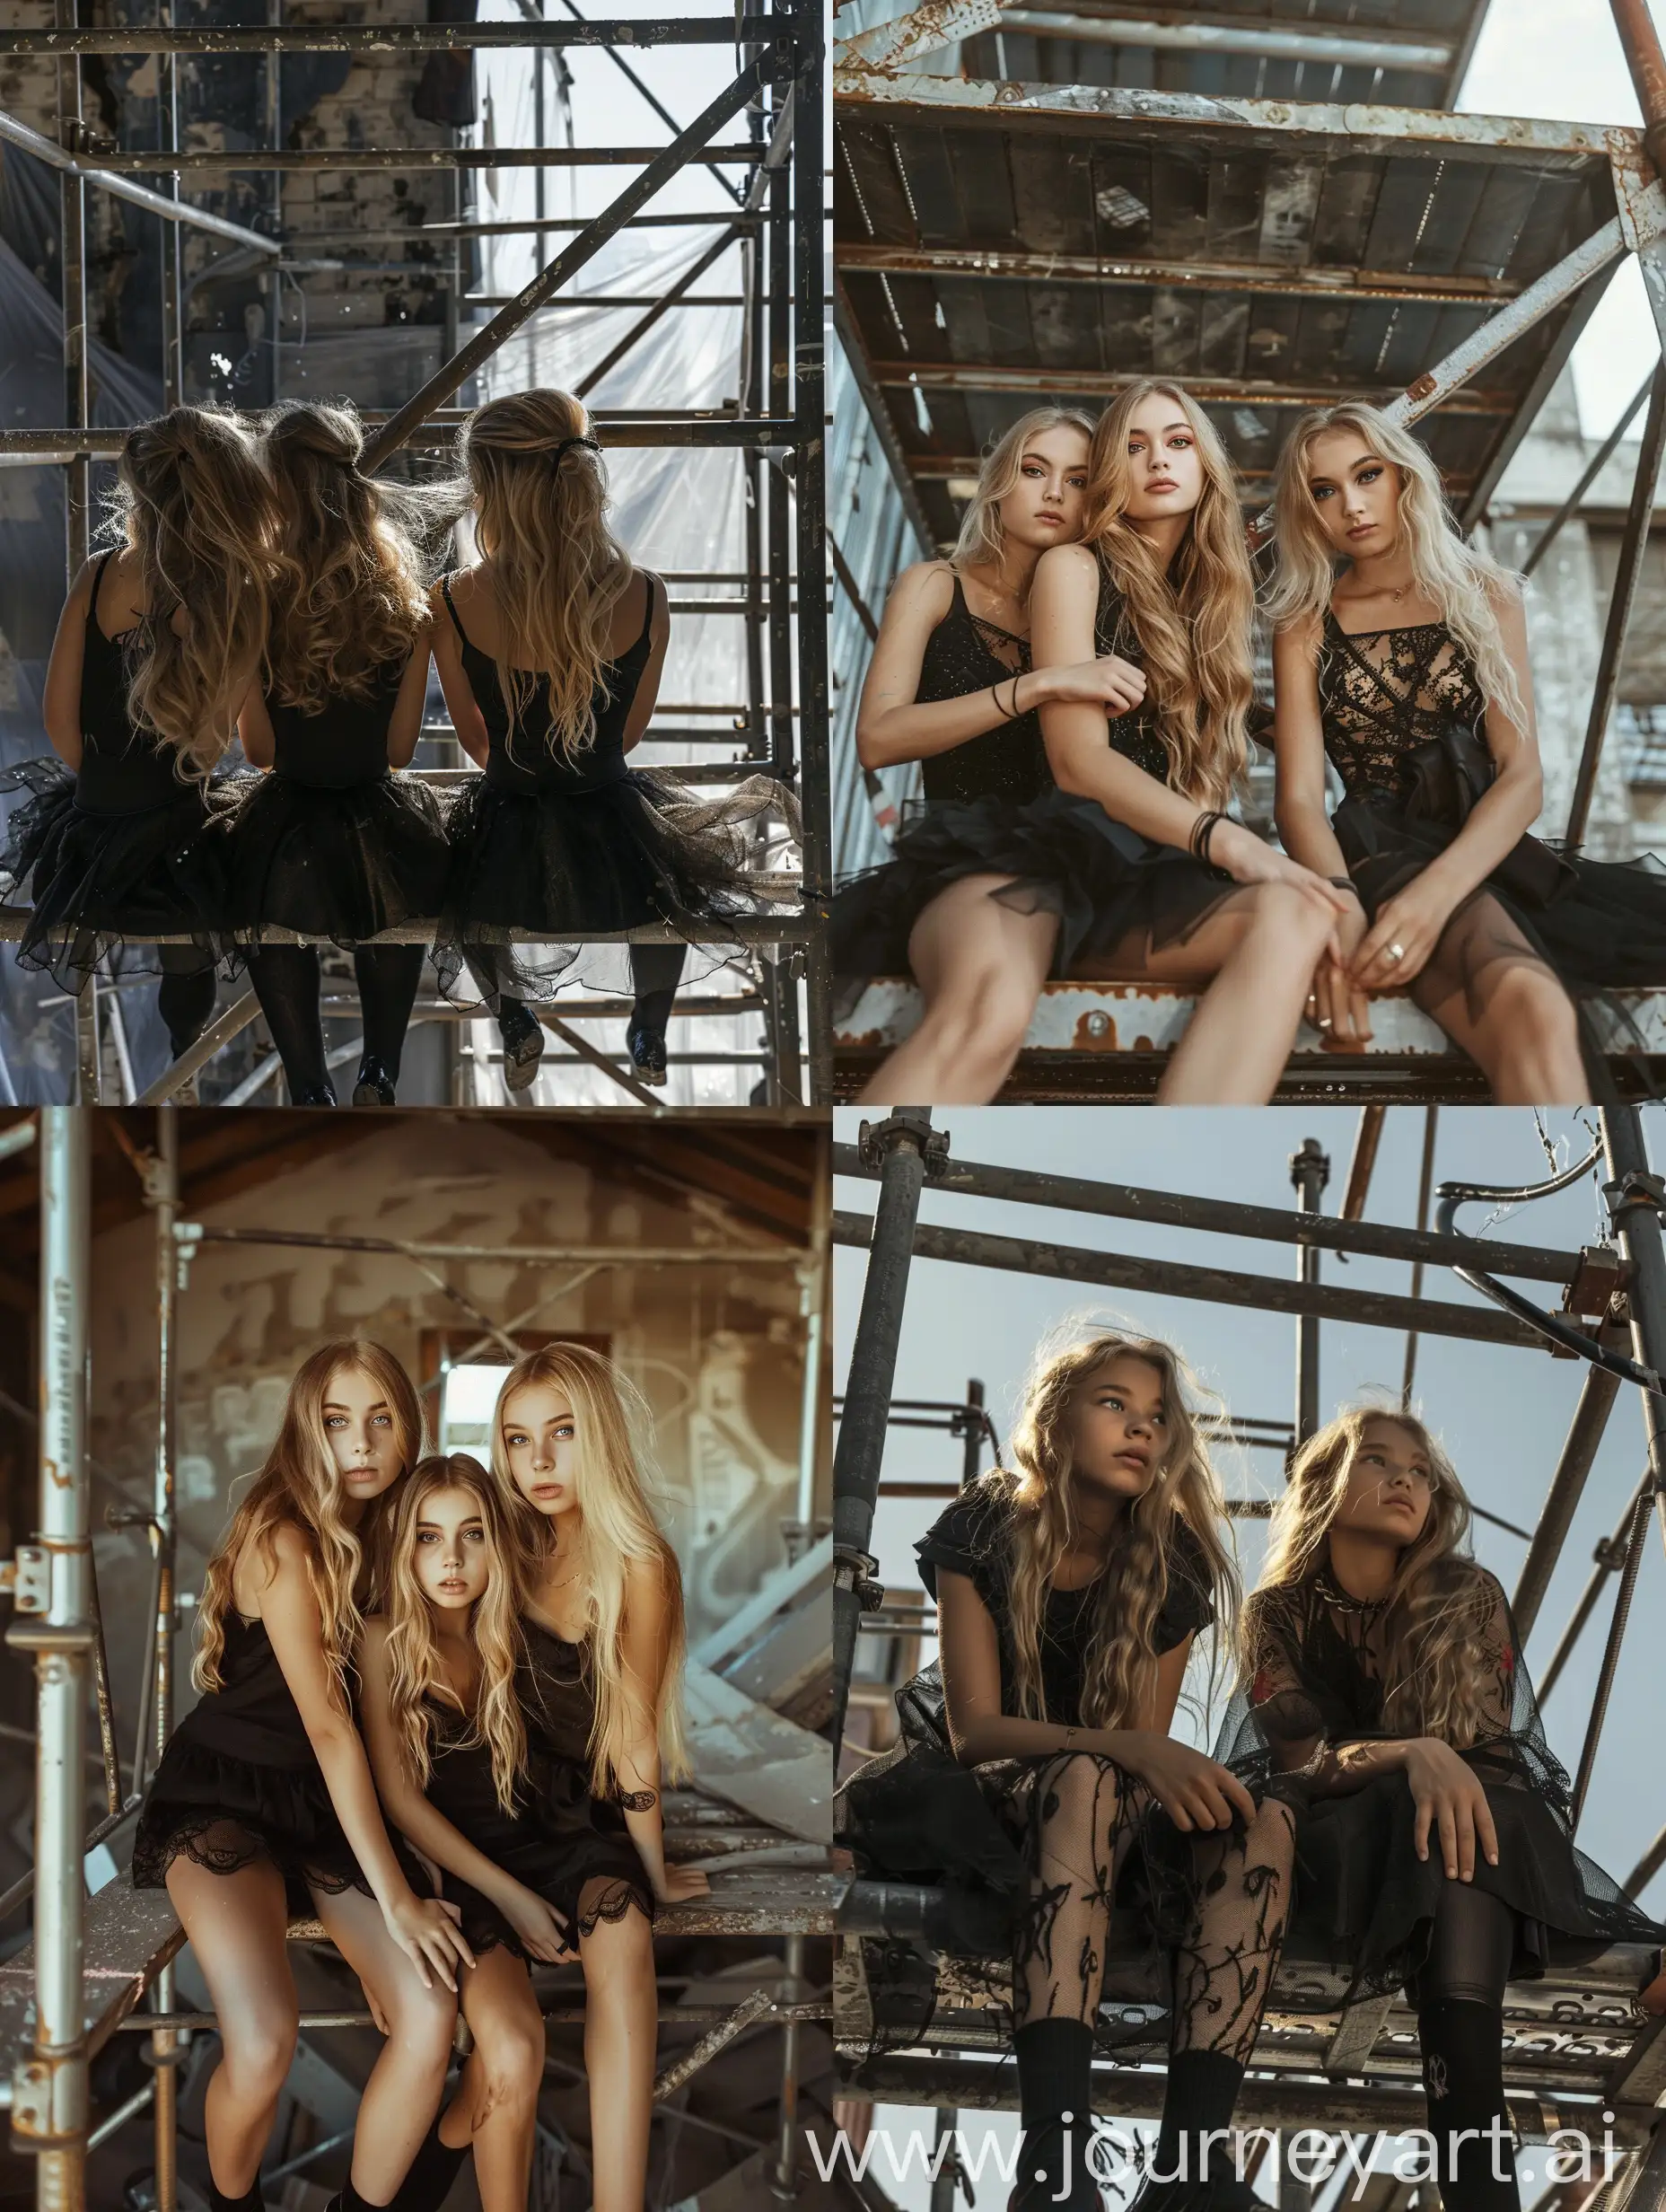 3 young girls, 22 years old, blonde long hair,  black dress, makeup, sitting, down view,  is working on a steel scaffold under construction